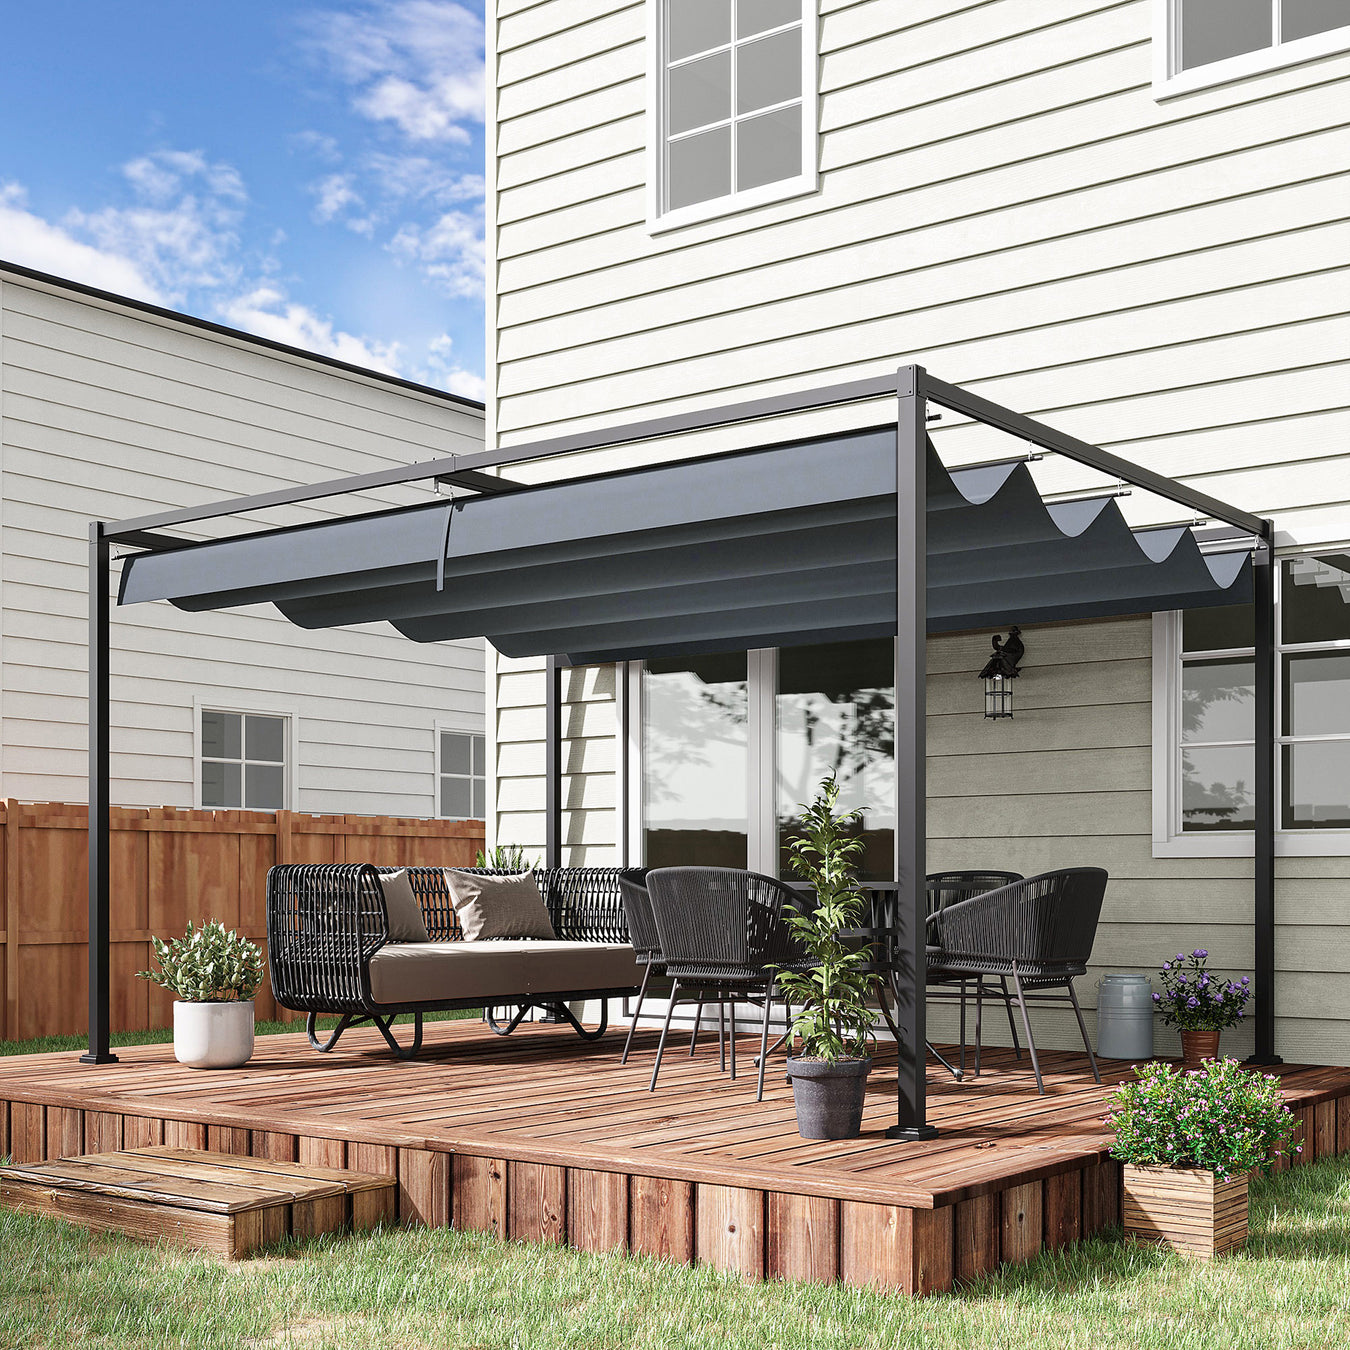 A retractable roof pergola on a deck with a stylish dining set